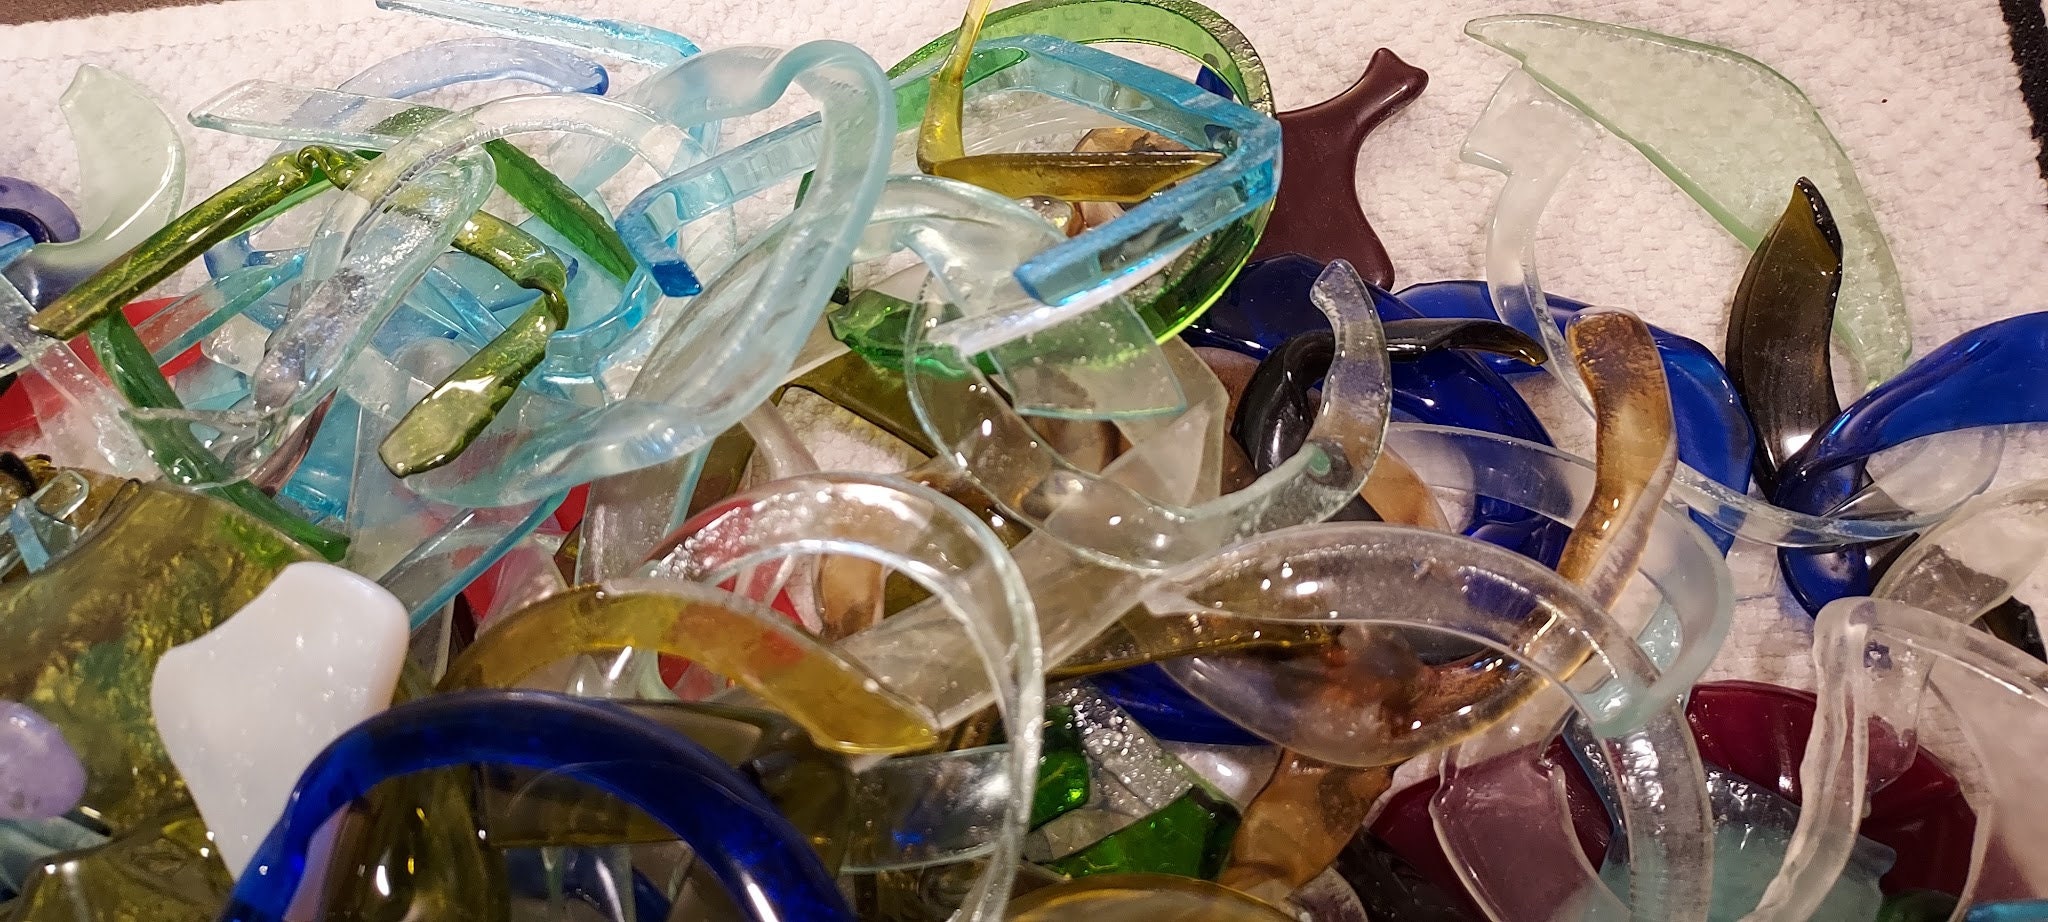 Broken Glass for Crafts, Glass for Mosaics, Reflective Glass